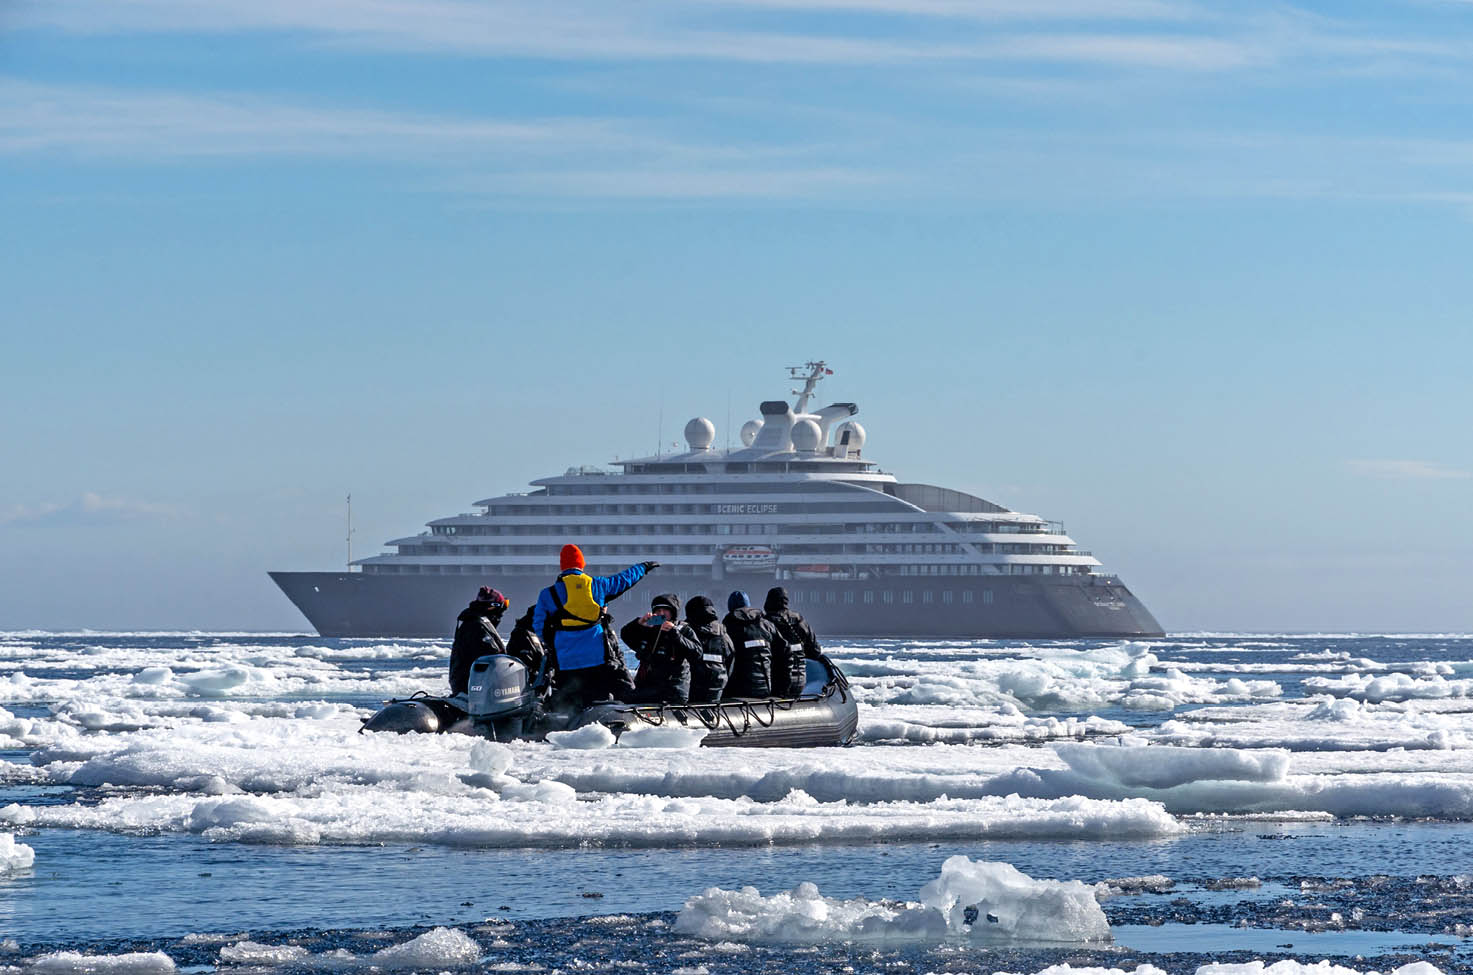 A group of guests with a guide on board a Zodiak boat, with ice floating in the sea and Scenic Eclipse in the background